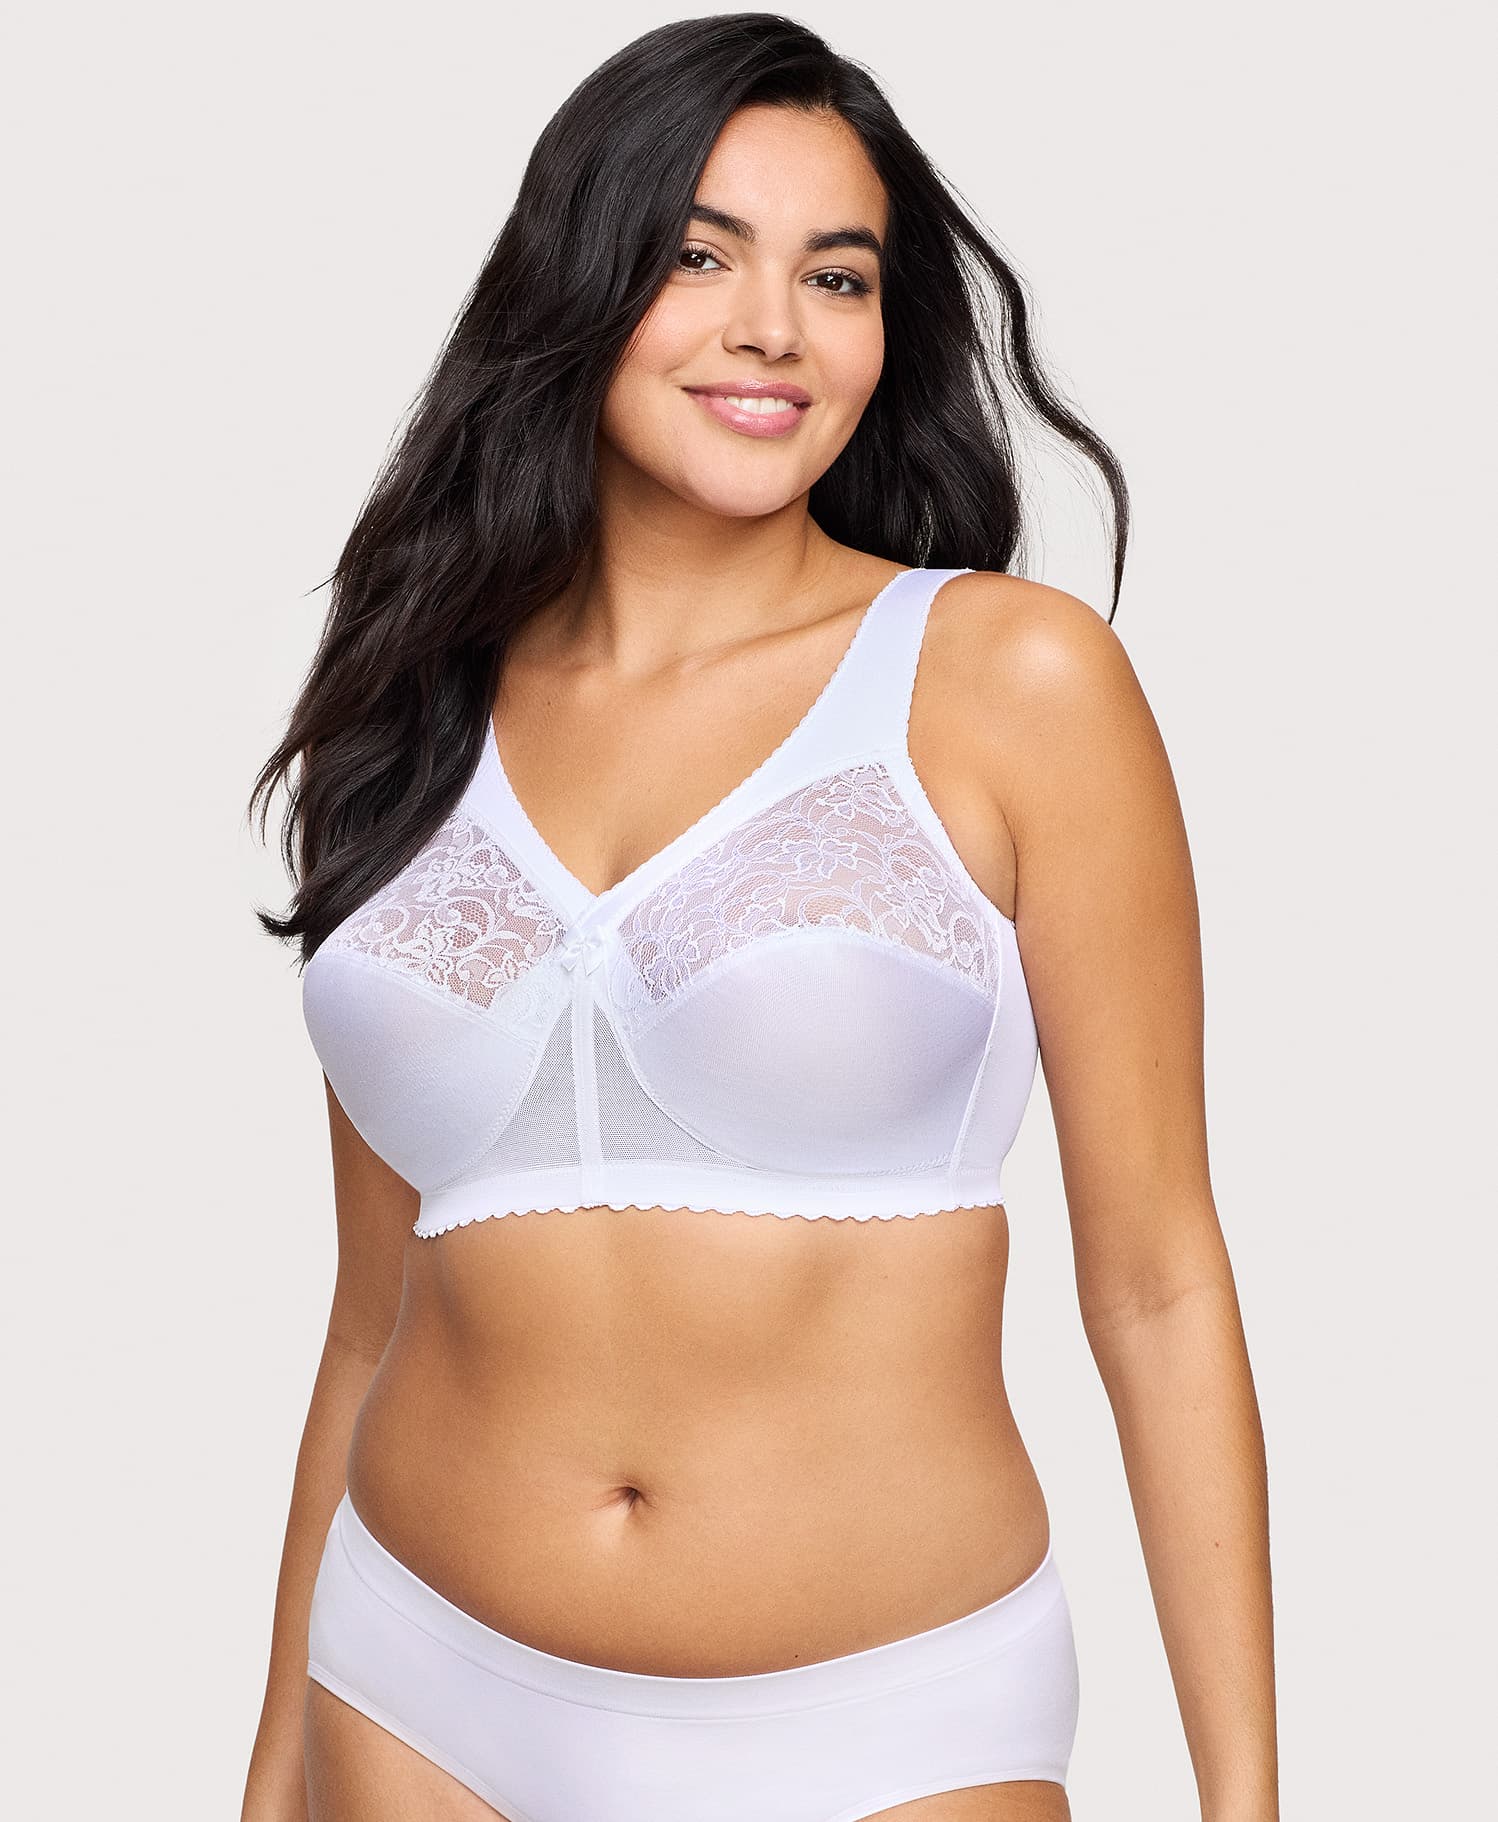 Glamorise COMPLETE COMFORT Bra 40B 40C 40D (STRAPLESS) Lace (WIRELESS)  WHITE NEW - Helia Beer Co